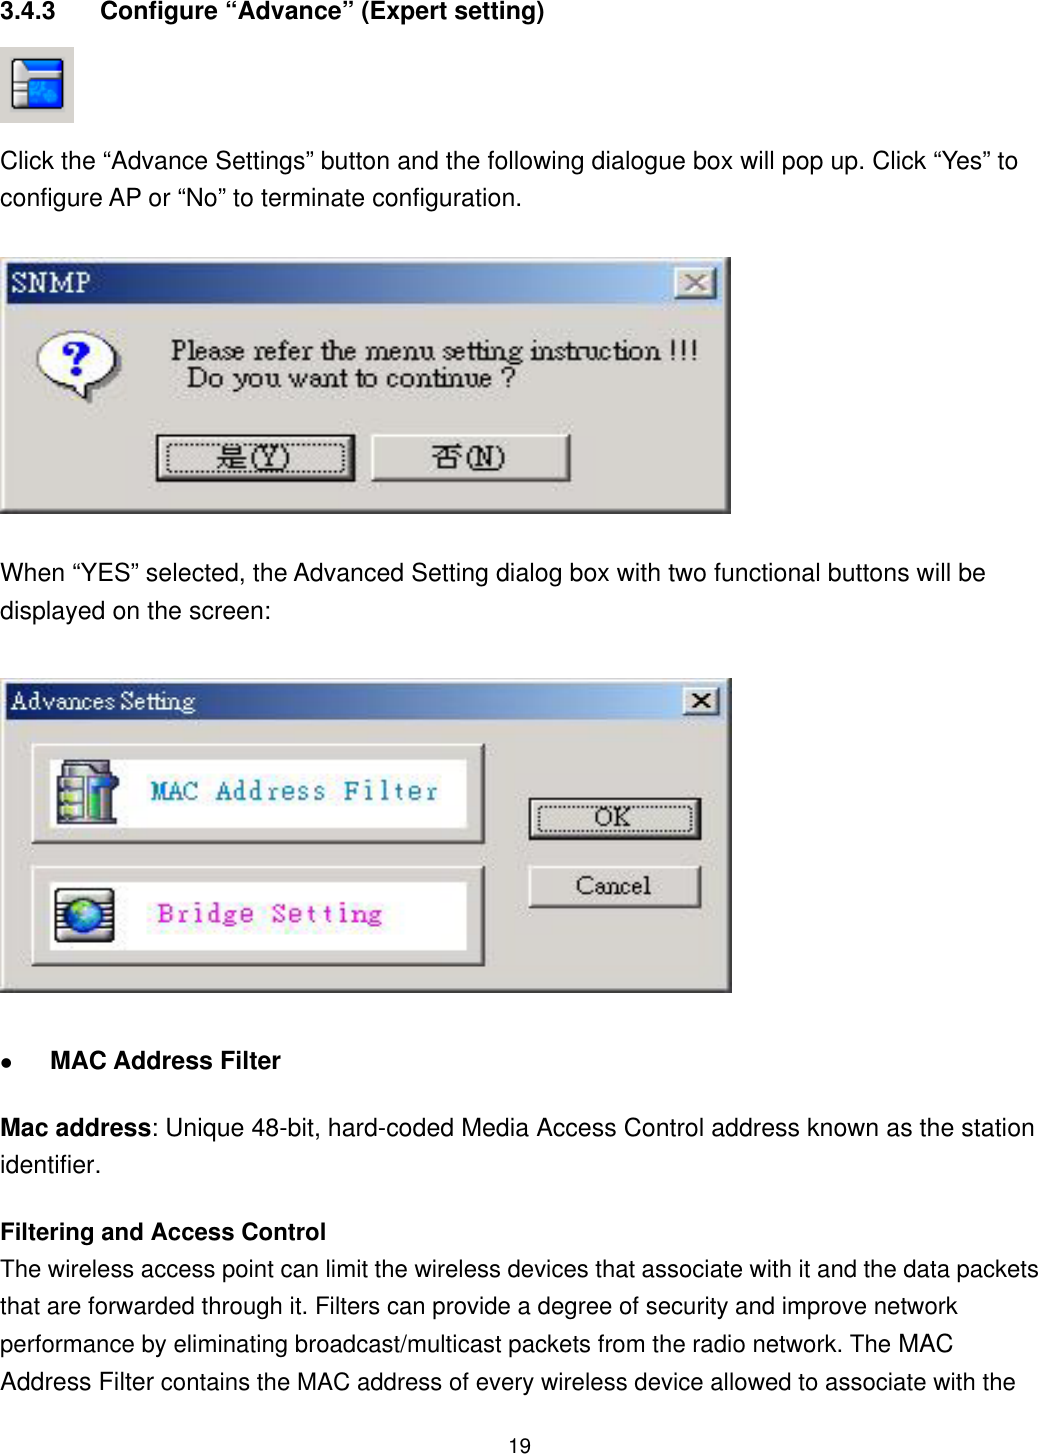  3.4.3  Configure “Advance” (Expert setting)  Click the “Advance Settings” button and the following dialogue box will pop up. Click “Yes” to configure AP or “No” to terminate configuration. When “YES” selected, the Advanced Setting dialog box with two functional buttons will be displayed on the screen:   MAC Address Filter Mac address: Unique 48-bit, hard-coded Media Access Control address known as the station identifier. Filtering and Access Control The wireless access point can limit the wireless devices that associate with it and the data packets that are forwarded through it. Filters can provide a degree of security and improve network performance by eliminating broadcast/multicast packets from the radio network. The MAC Address Filter contains the MAC address of every wireless device allowed to associate with the  19